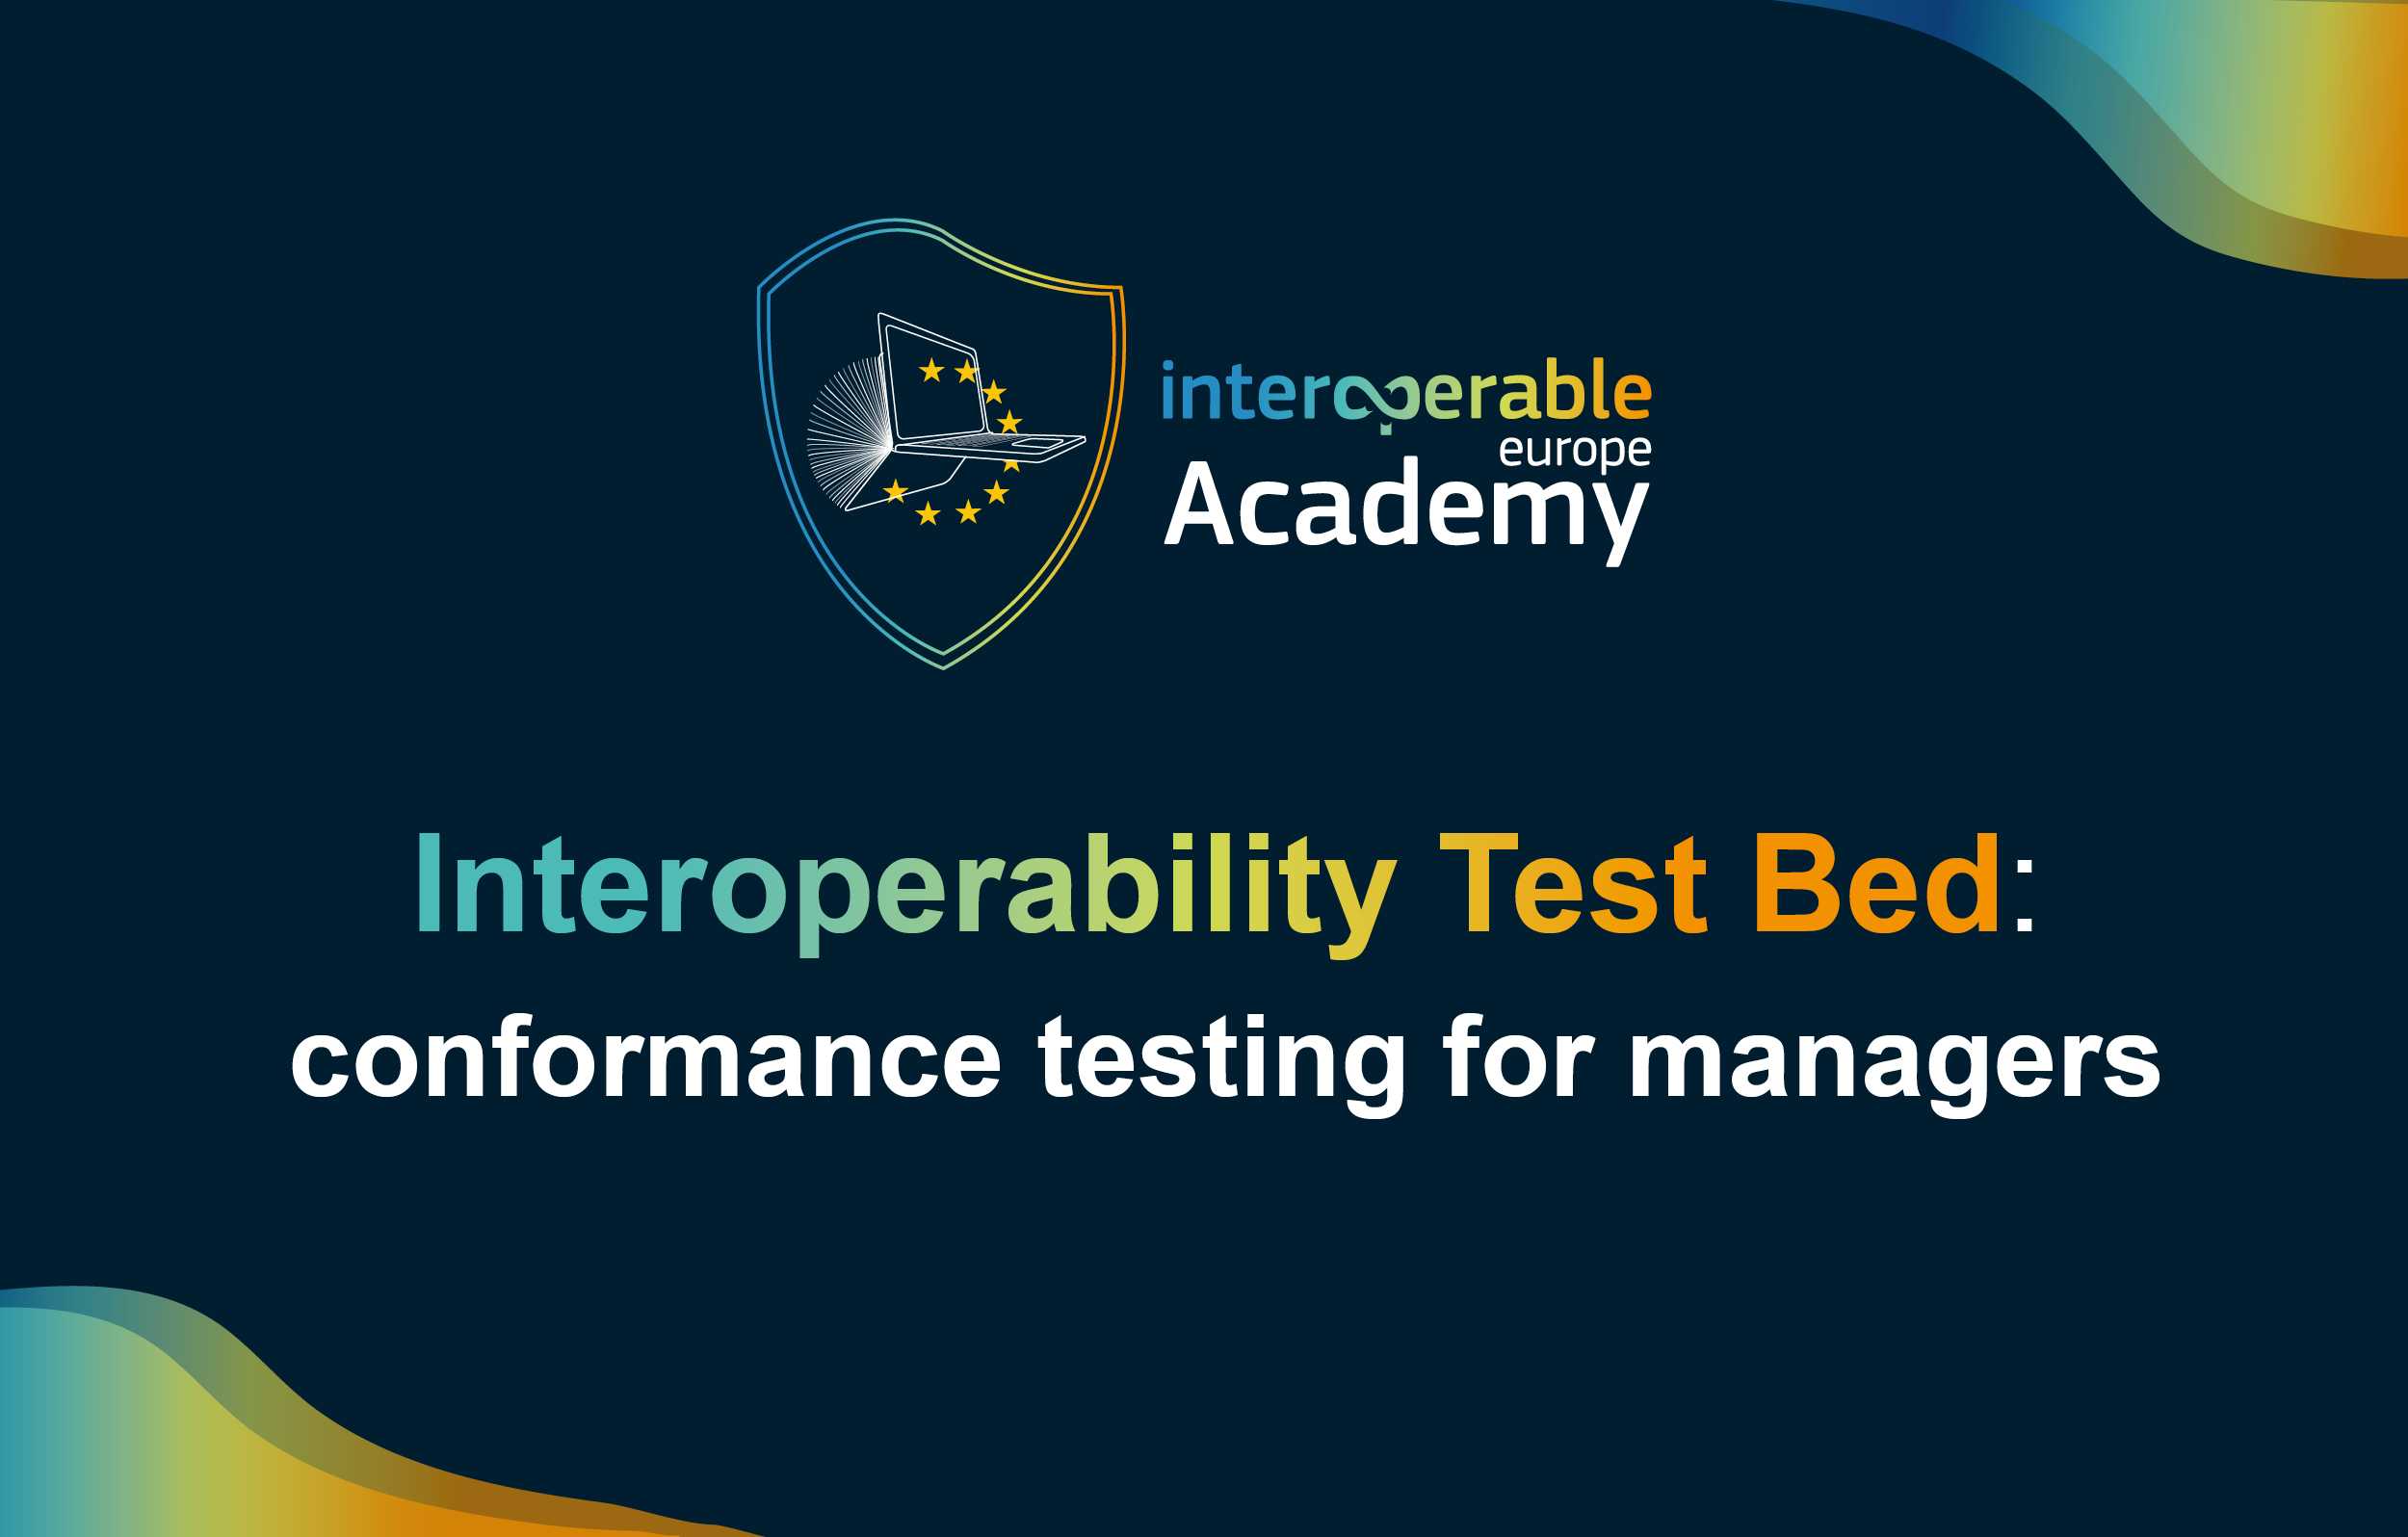 Conformance testing for managers